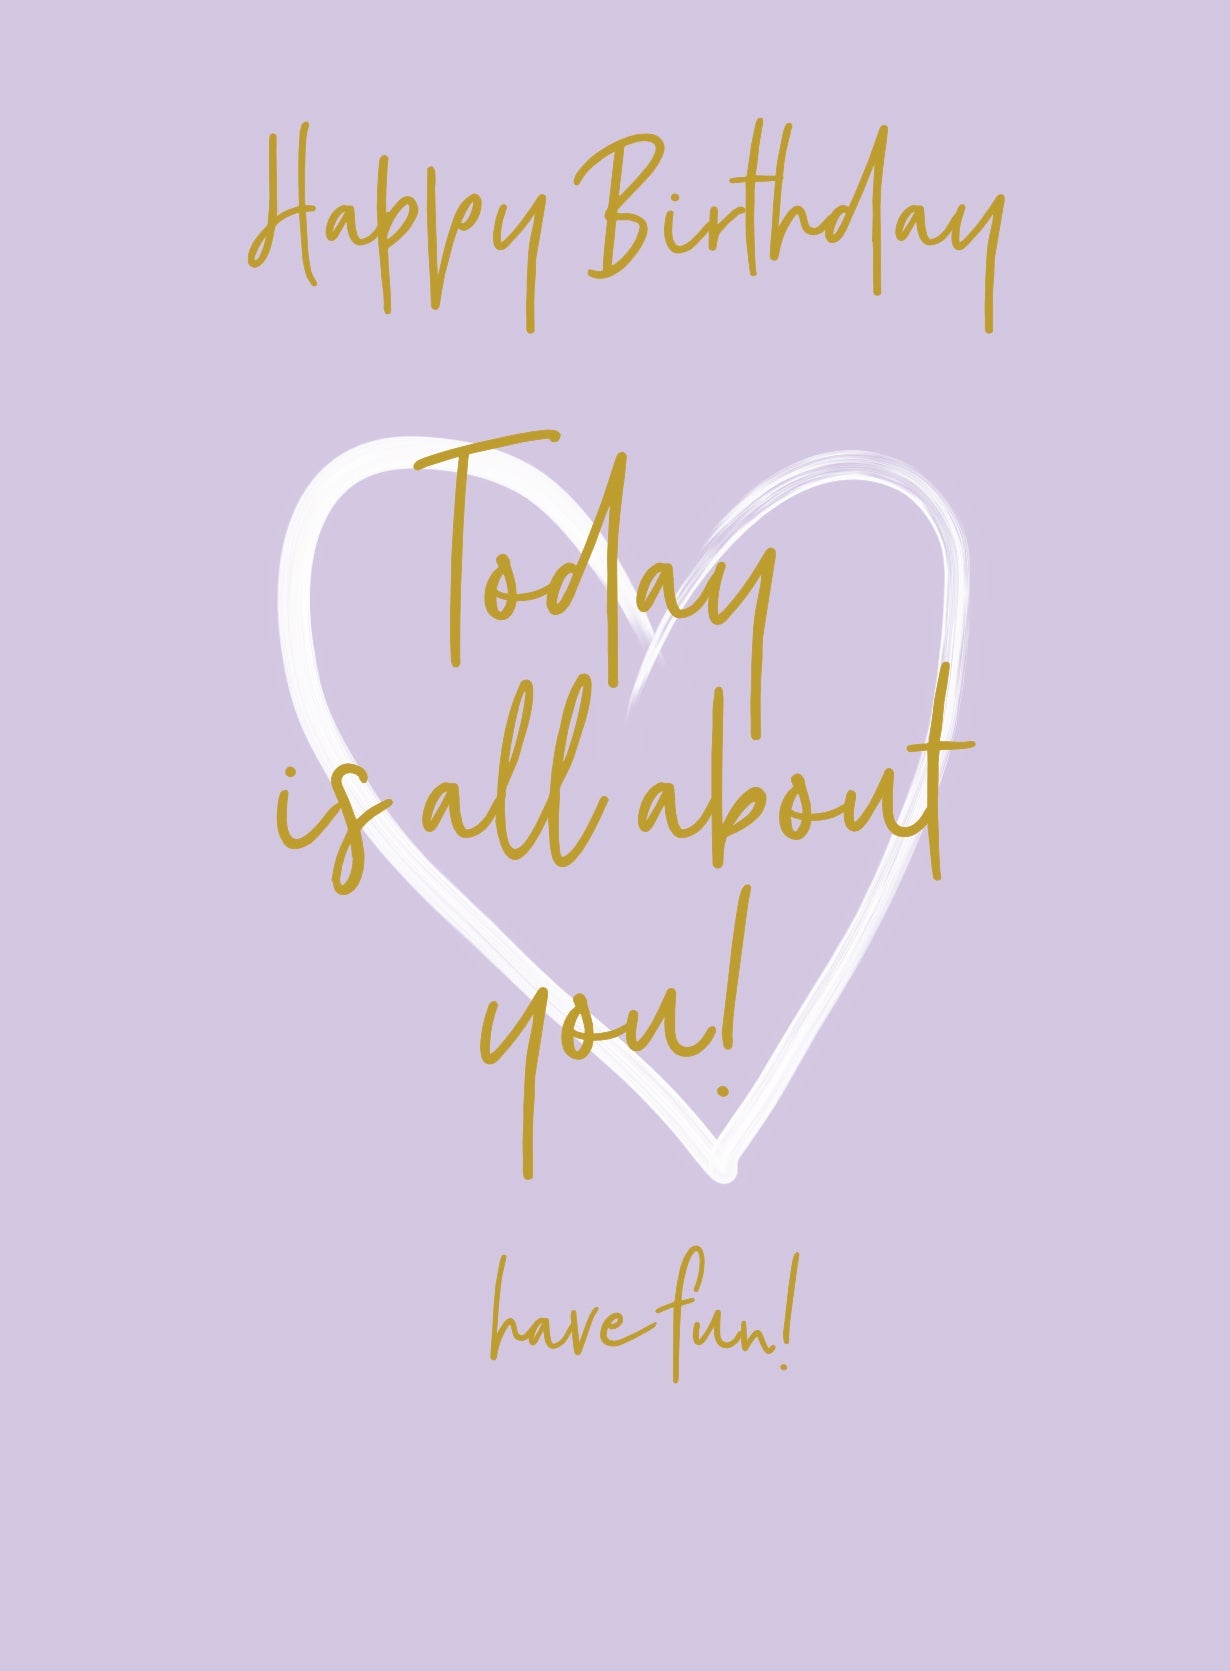 Wonderful You All About You Birthday Card - Foil